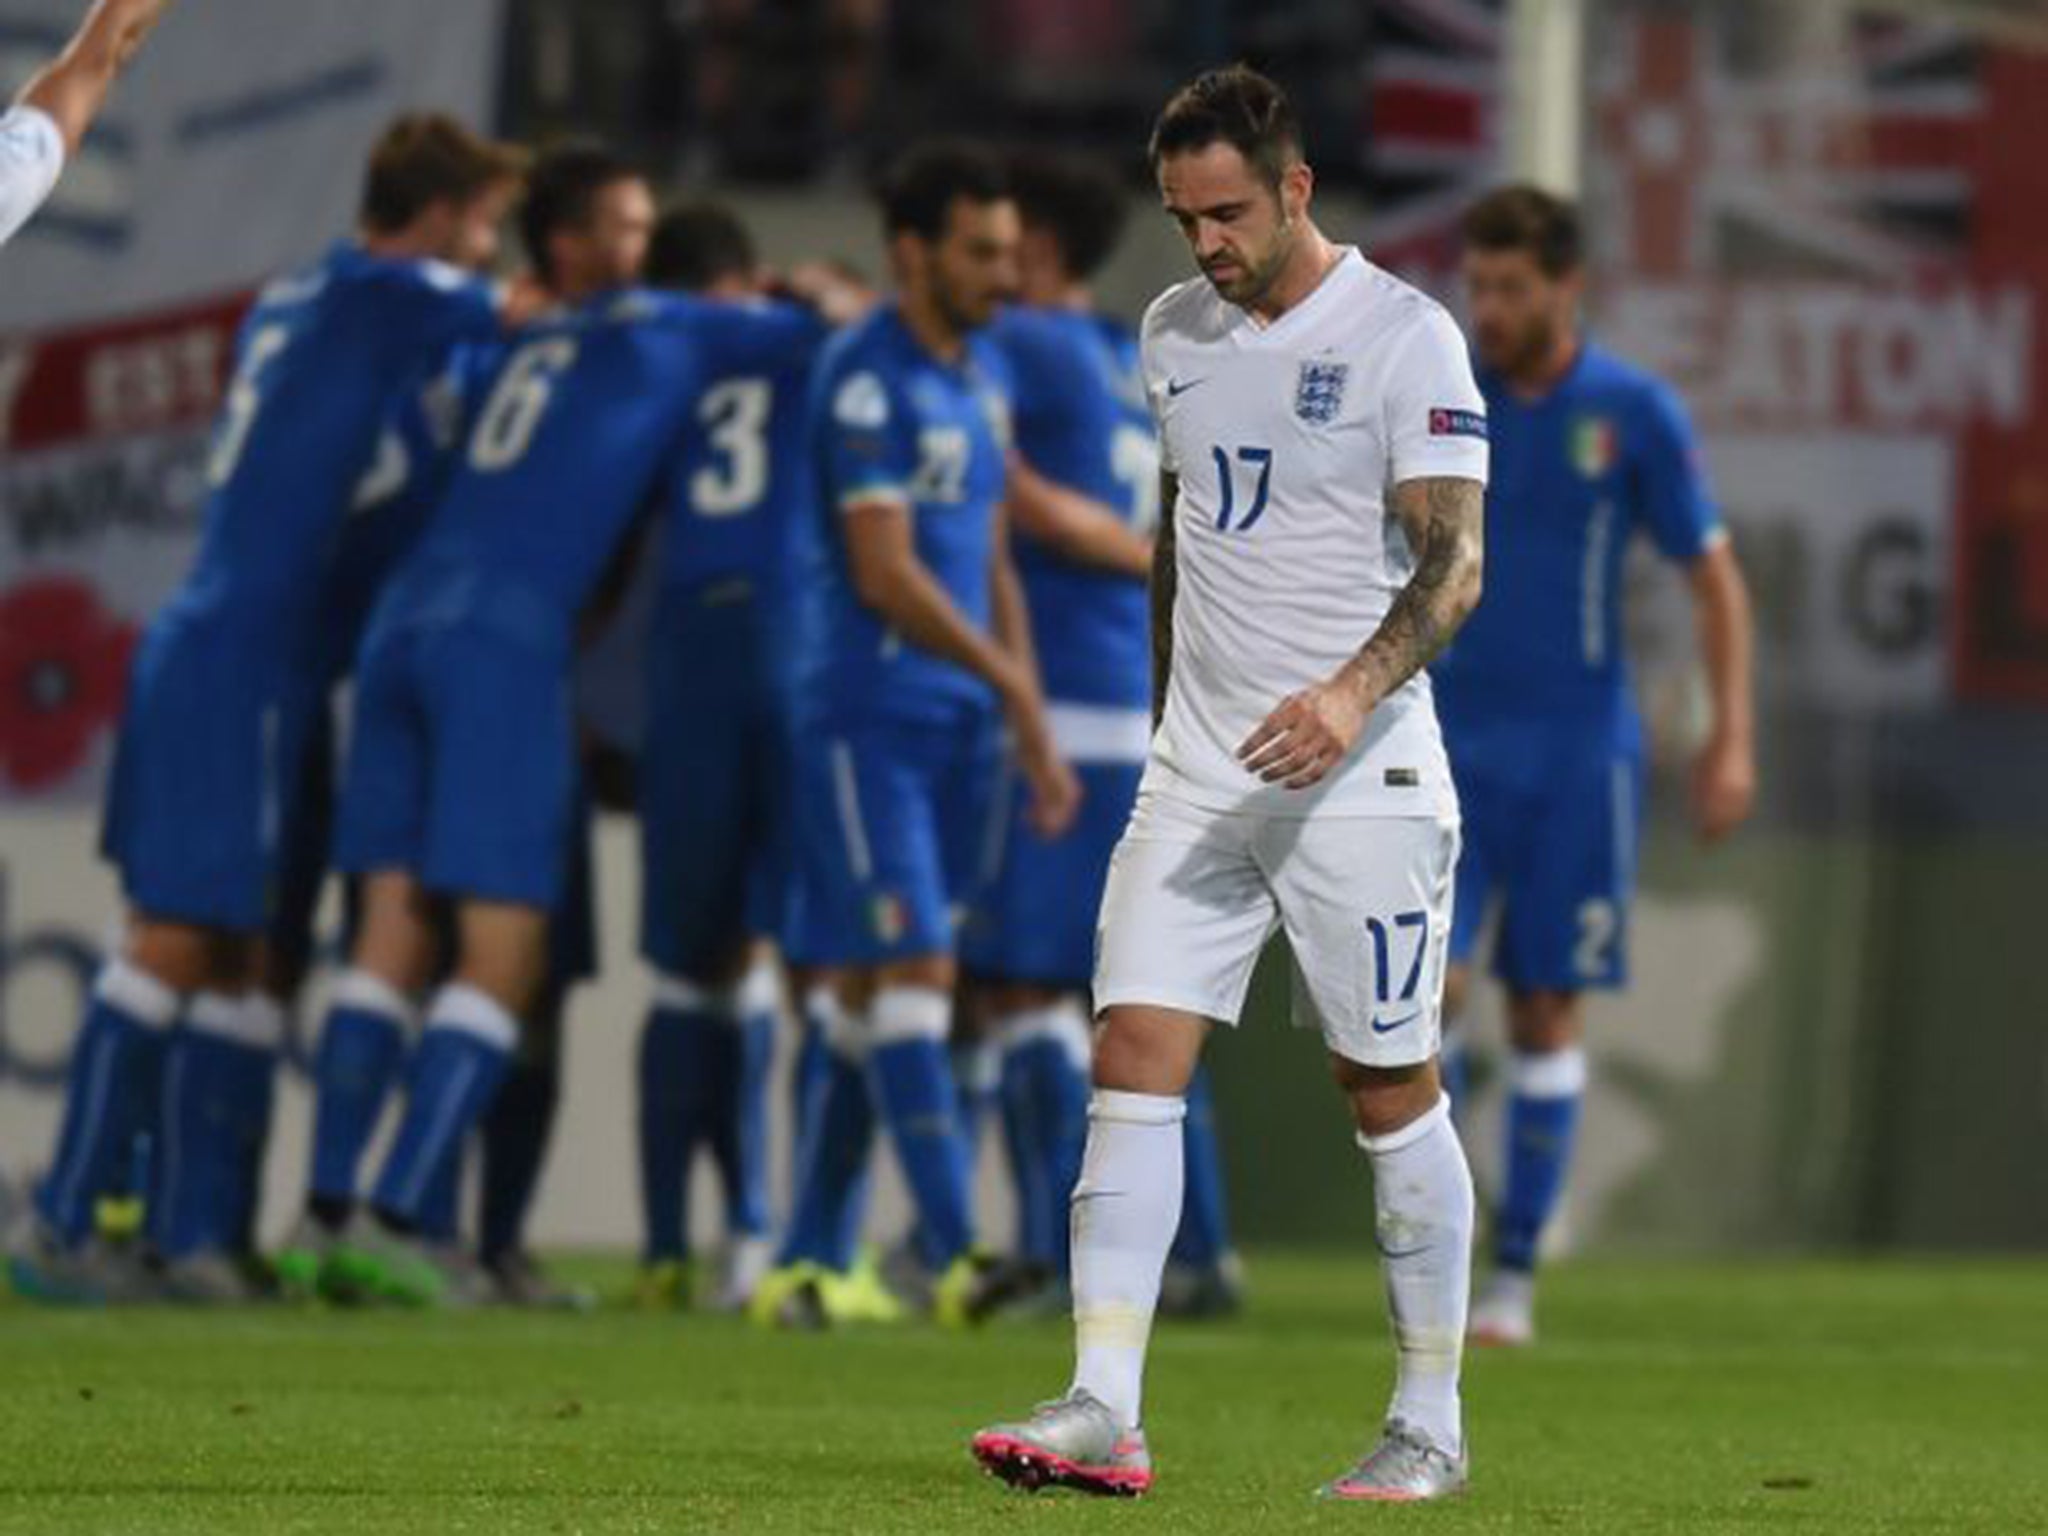 England’s Danny Ings looks downcast in Olomouc on Wednesday as the Italy players celebrate one of their goals